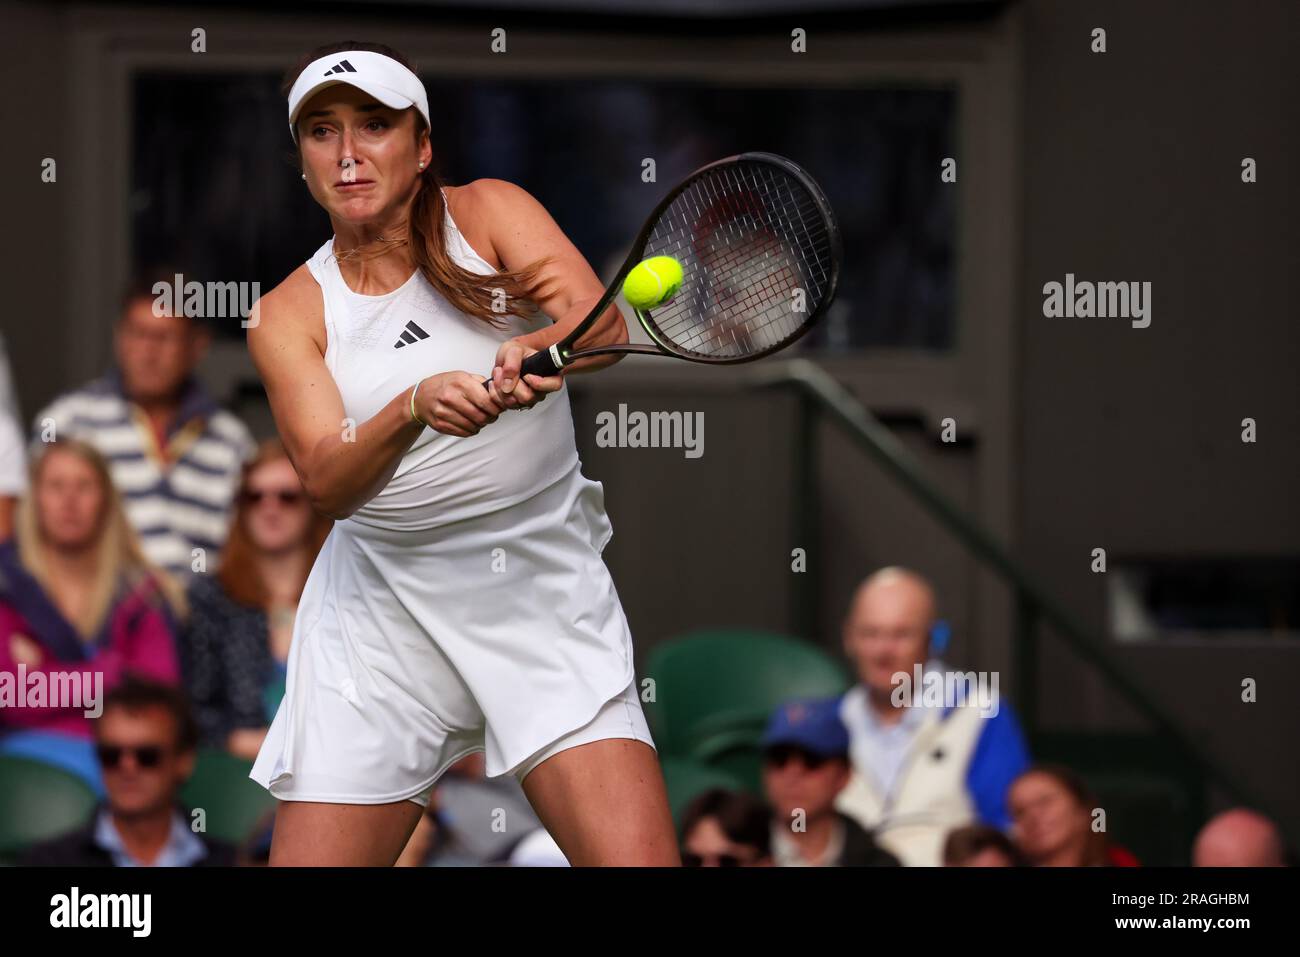 Wimbledon. Elina Svitolina of, Ukraine. 03rd July, 2023. in action during her first round match against Venus Williams of the United States during opening day at Wimbledon. Credit: Adam Stoltman/Alamy Live News Stock Photo